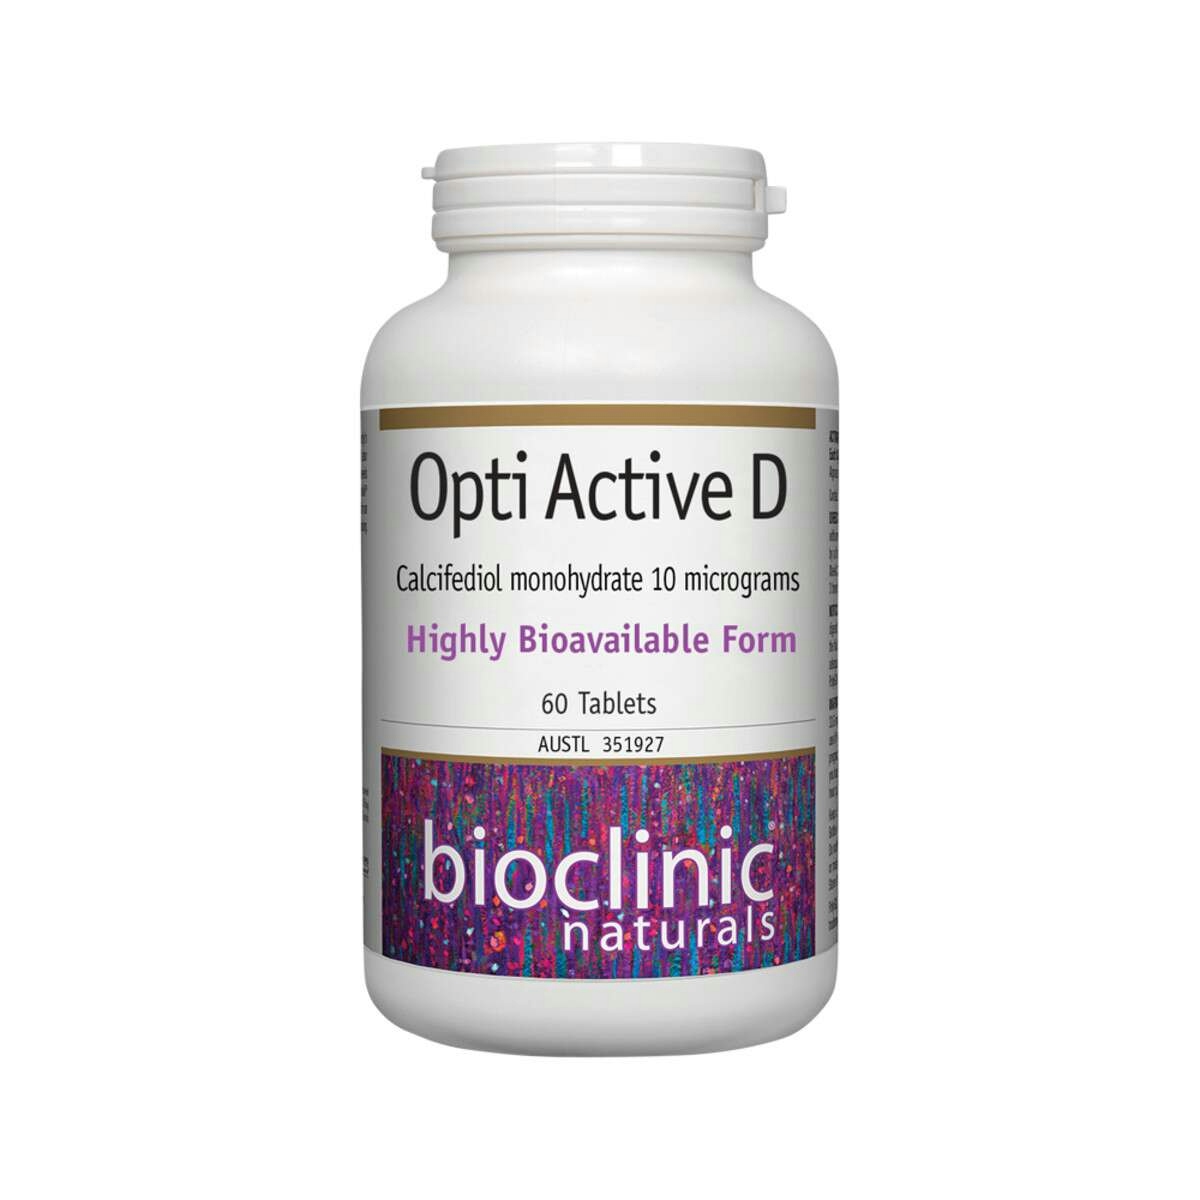 image of Bioclinic Naturals Opti Active D 60t on white background 